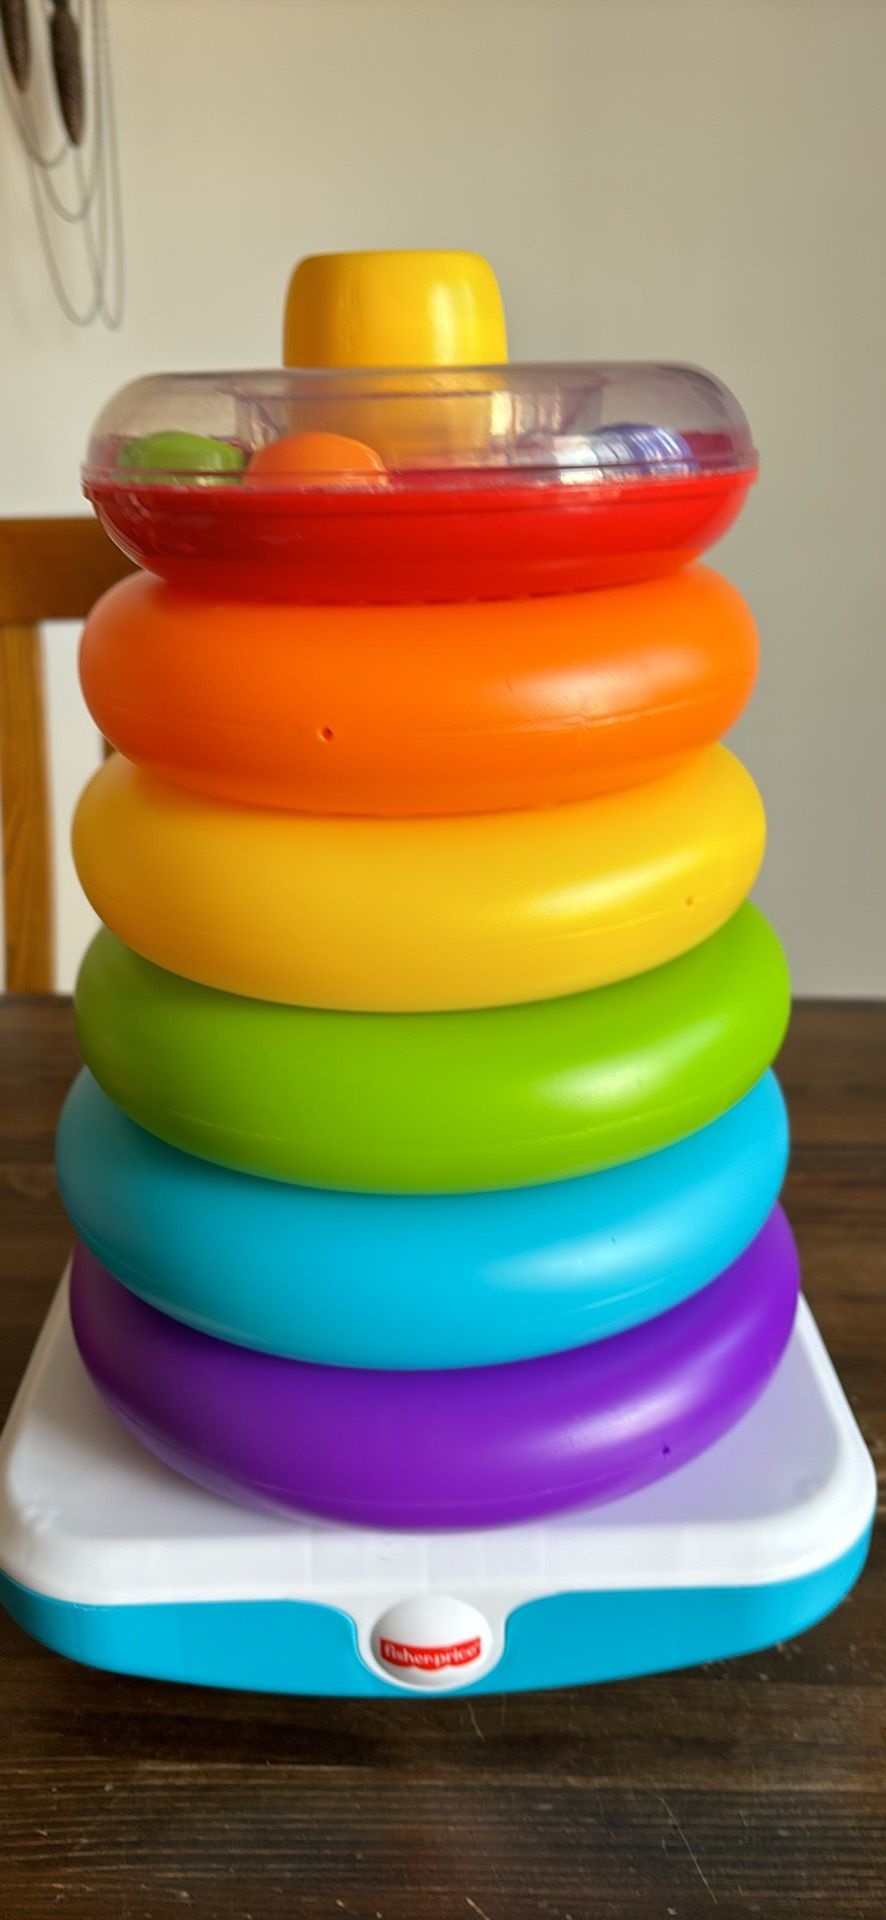 Fisher Price 15” Rock ‘n Stack  Toddler Toy 18-24 month  educational play companion 